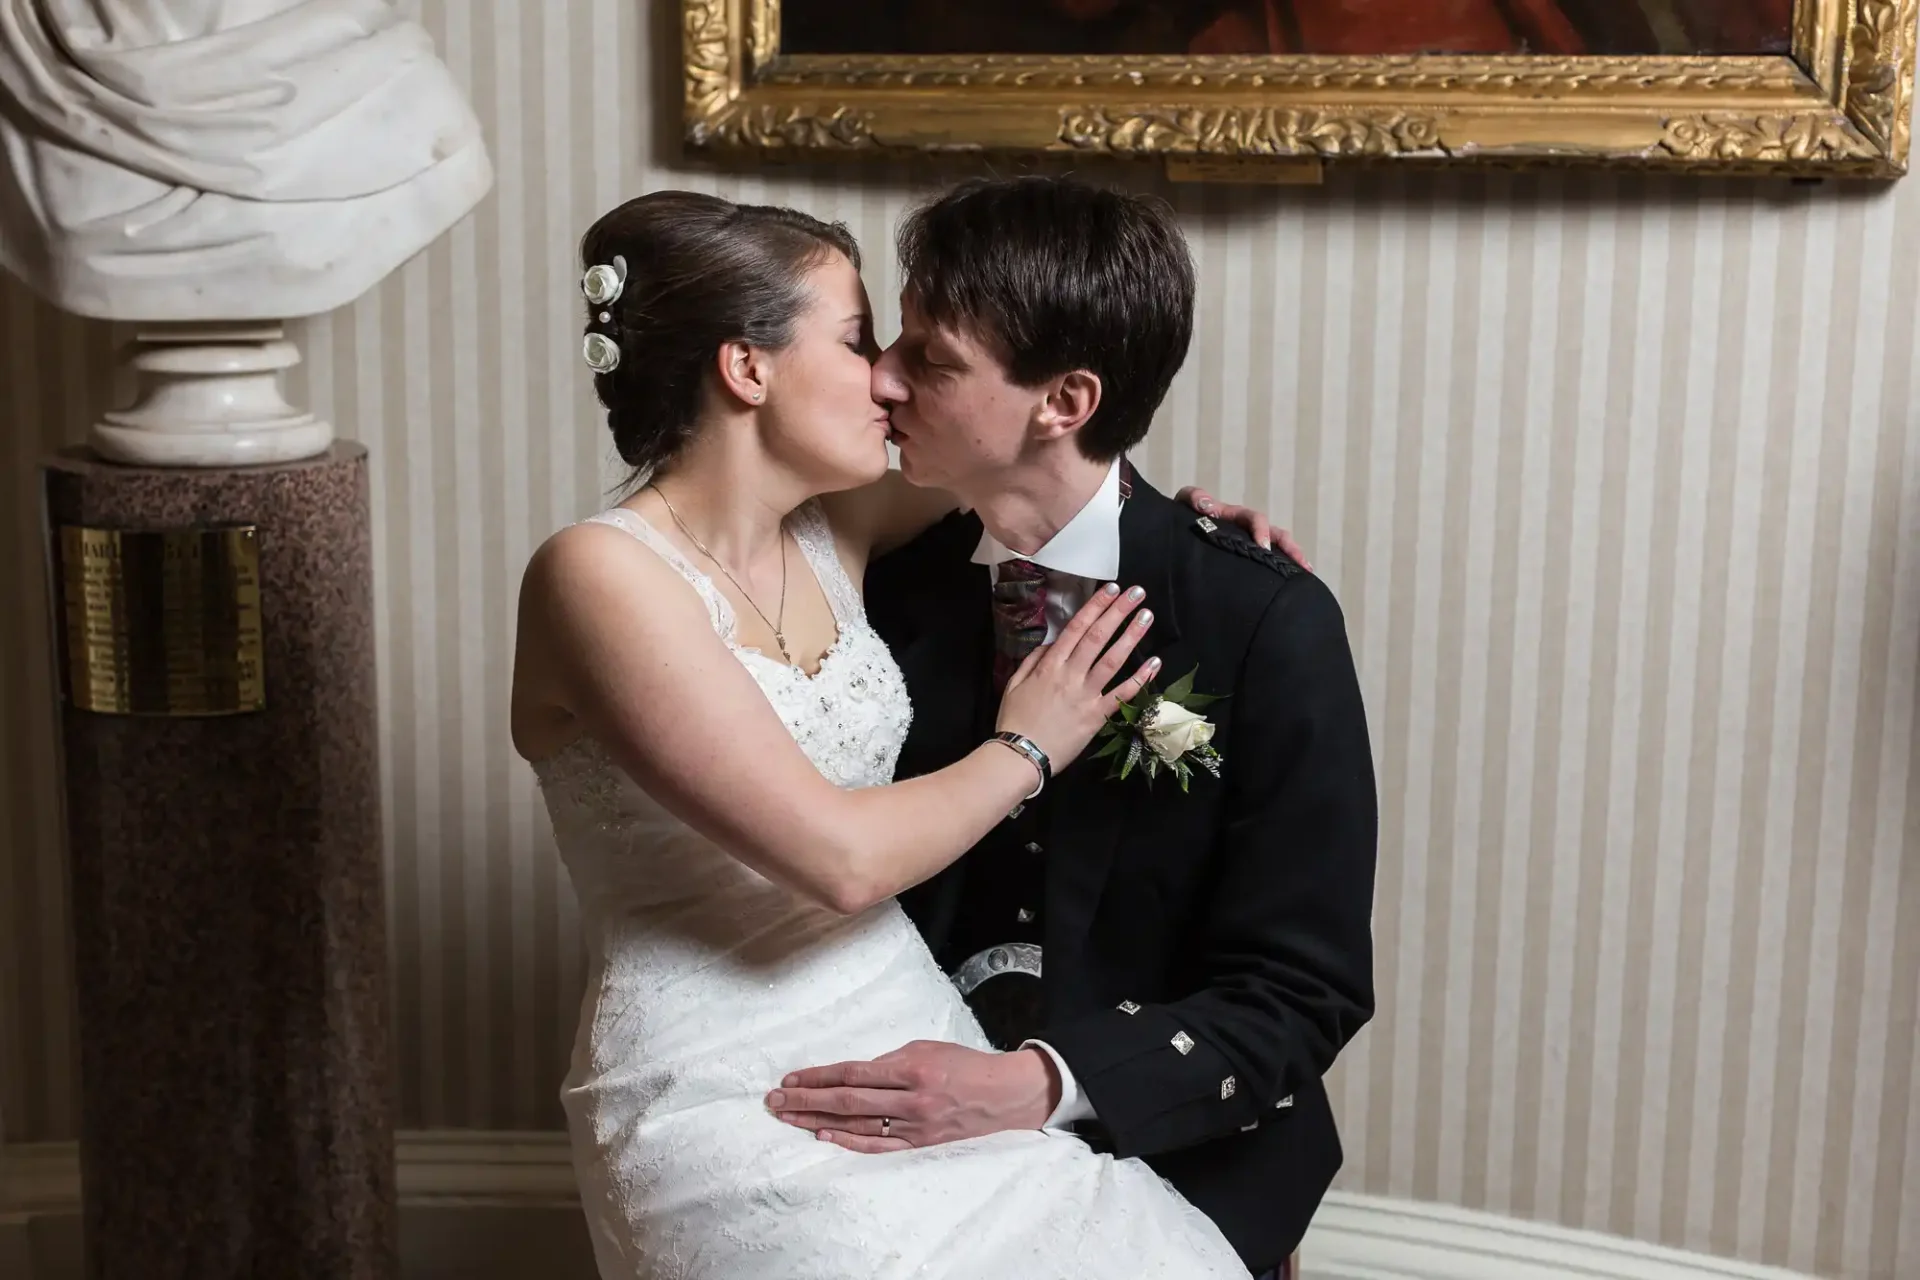 A bride and groom sharing a kiss, with the bride seated on the groom's lap, both dressed in formal wedding attire, in a room with elegant decor.